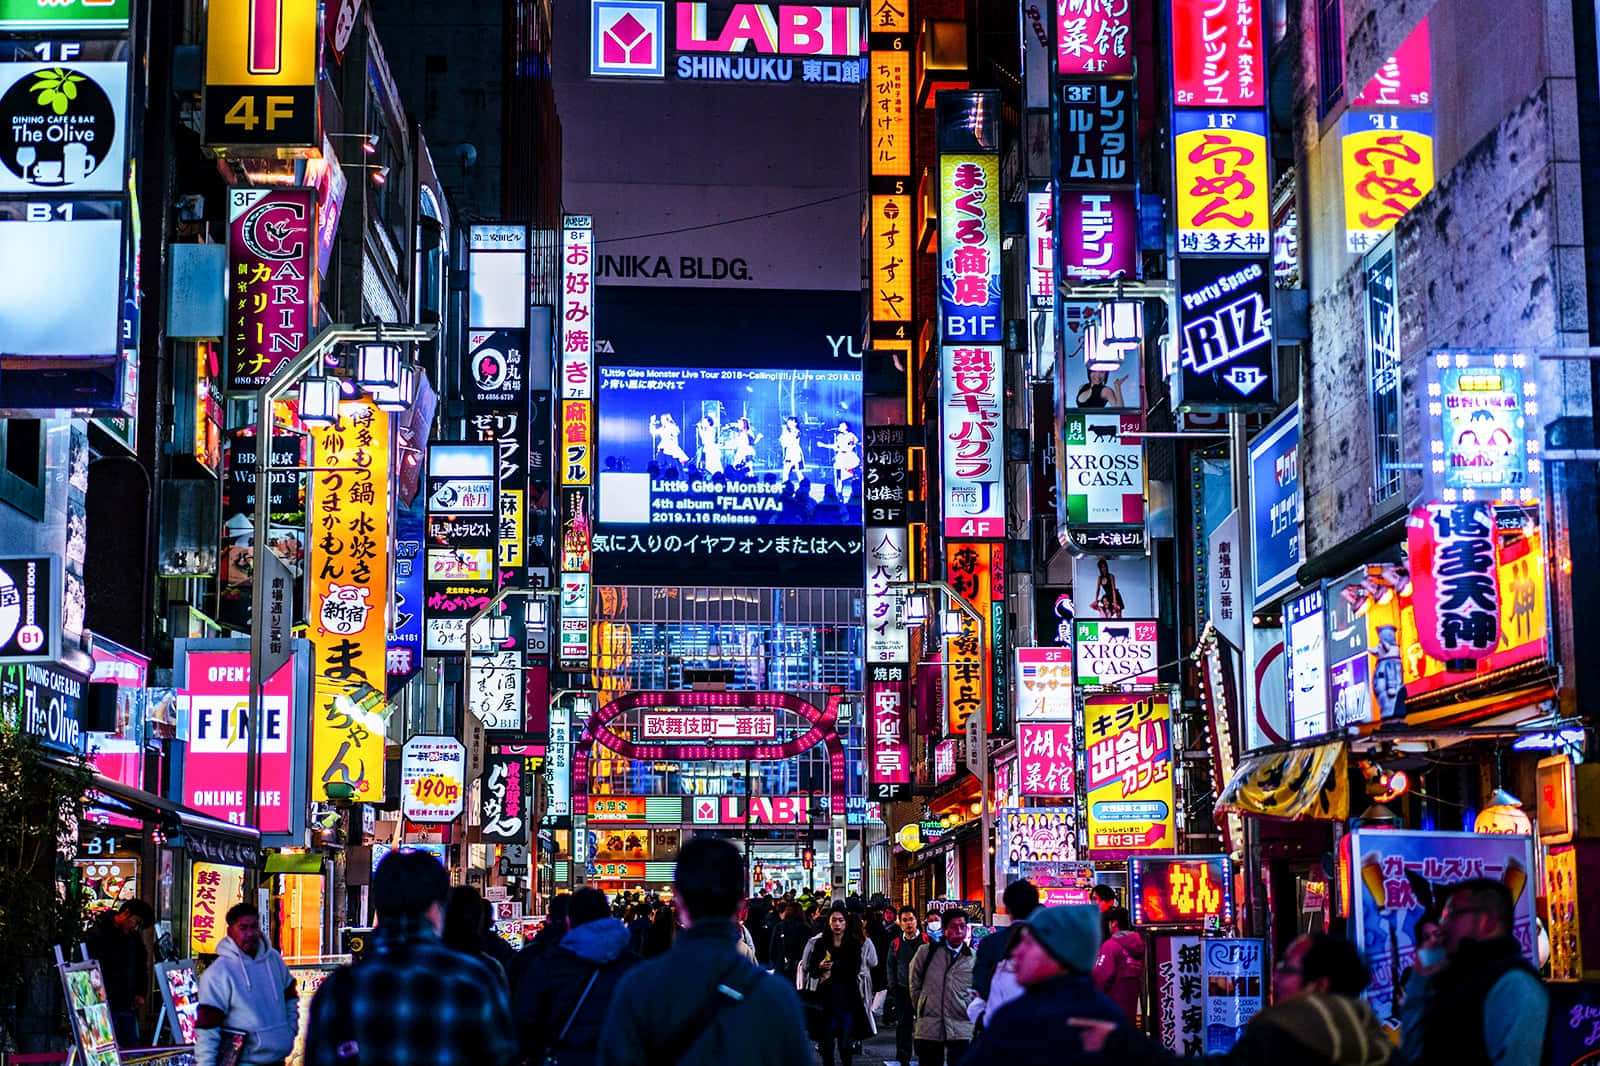 The hustle and bustle of Tokyo, Japan